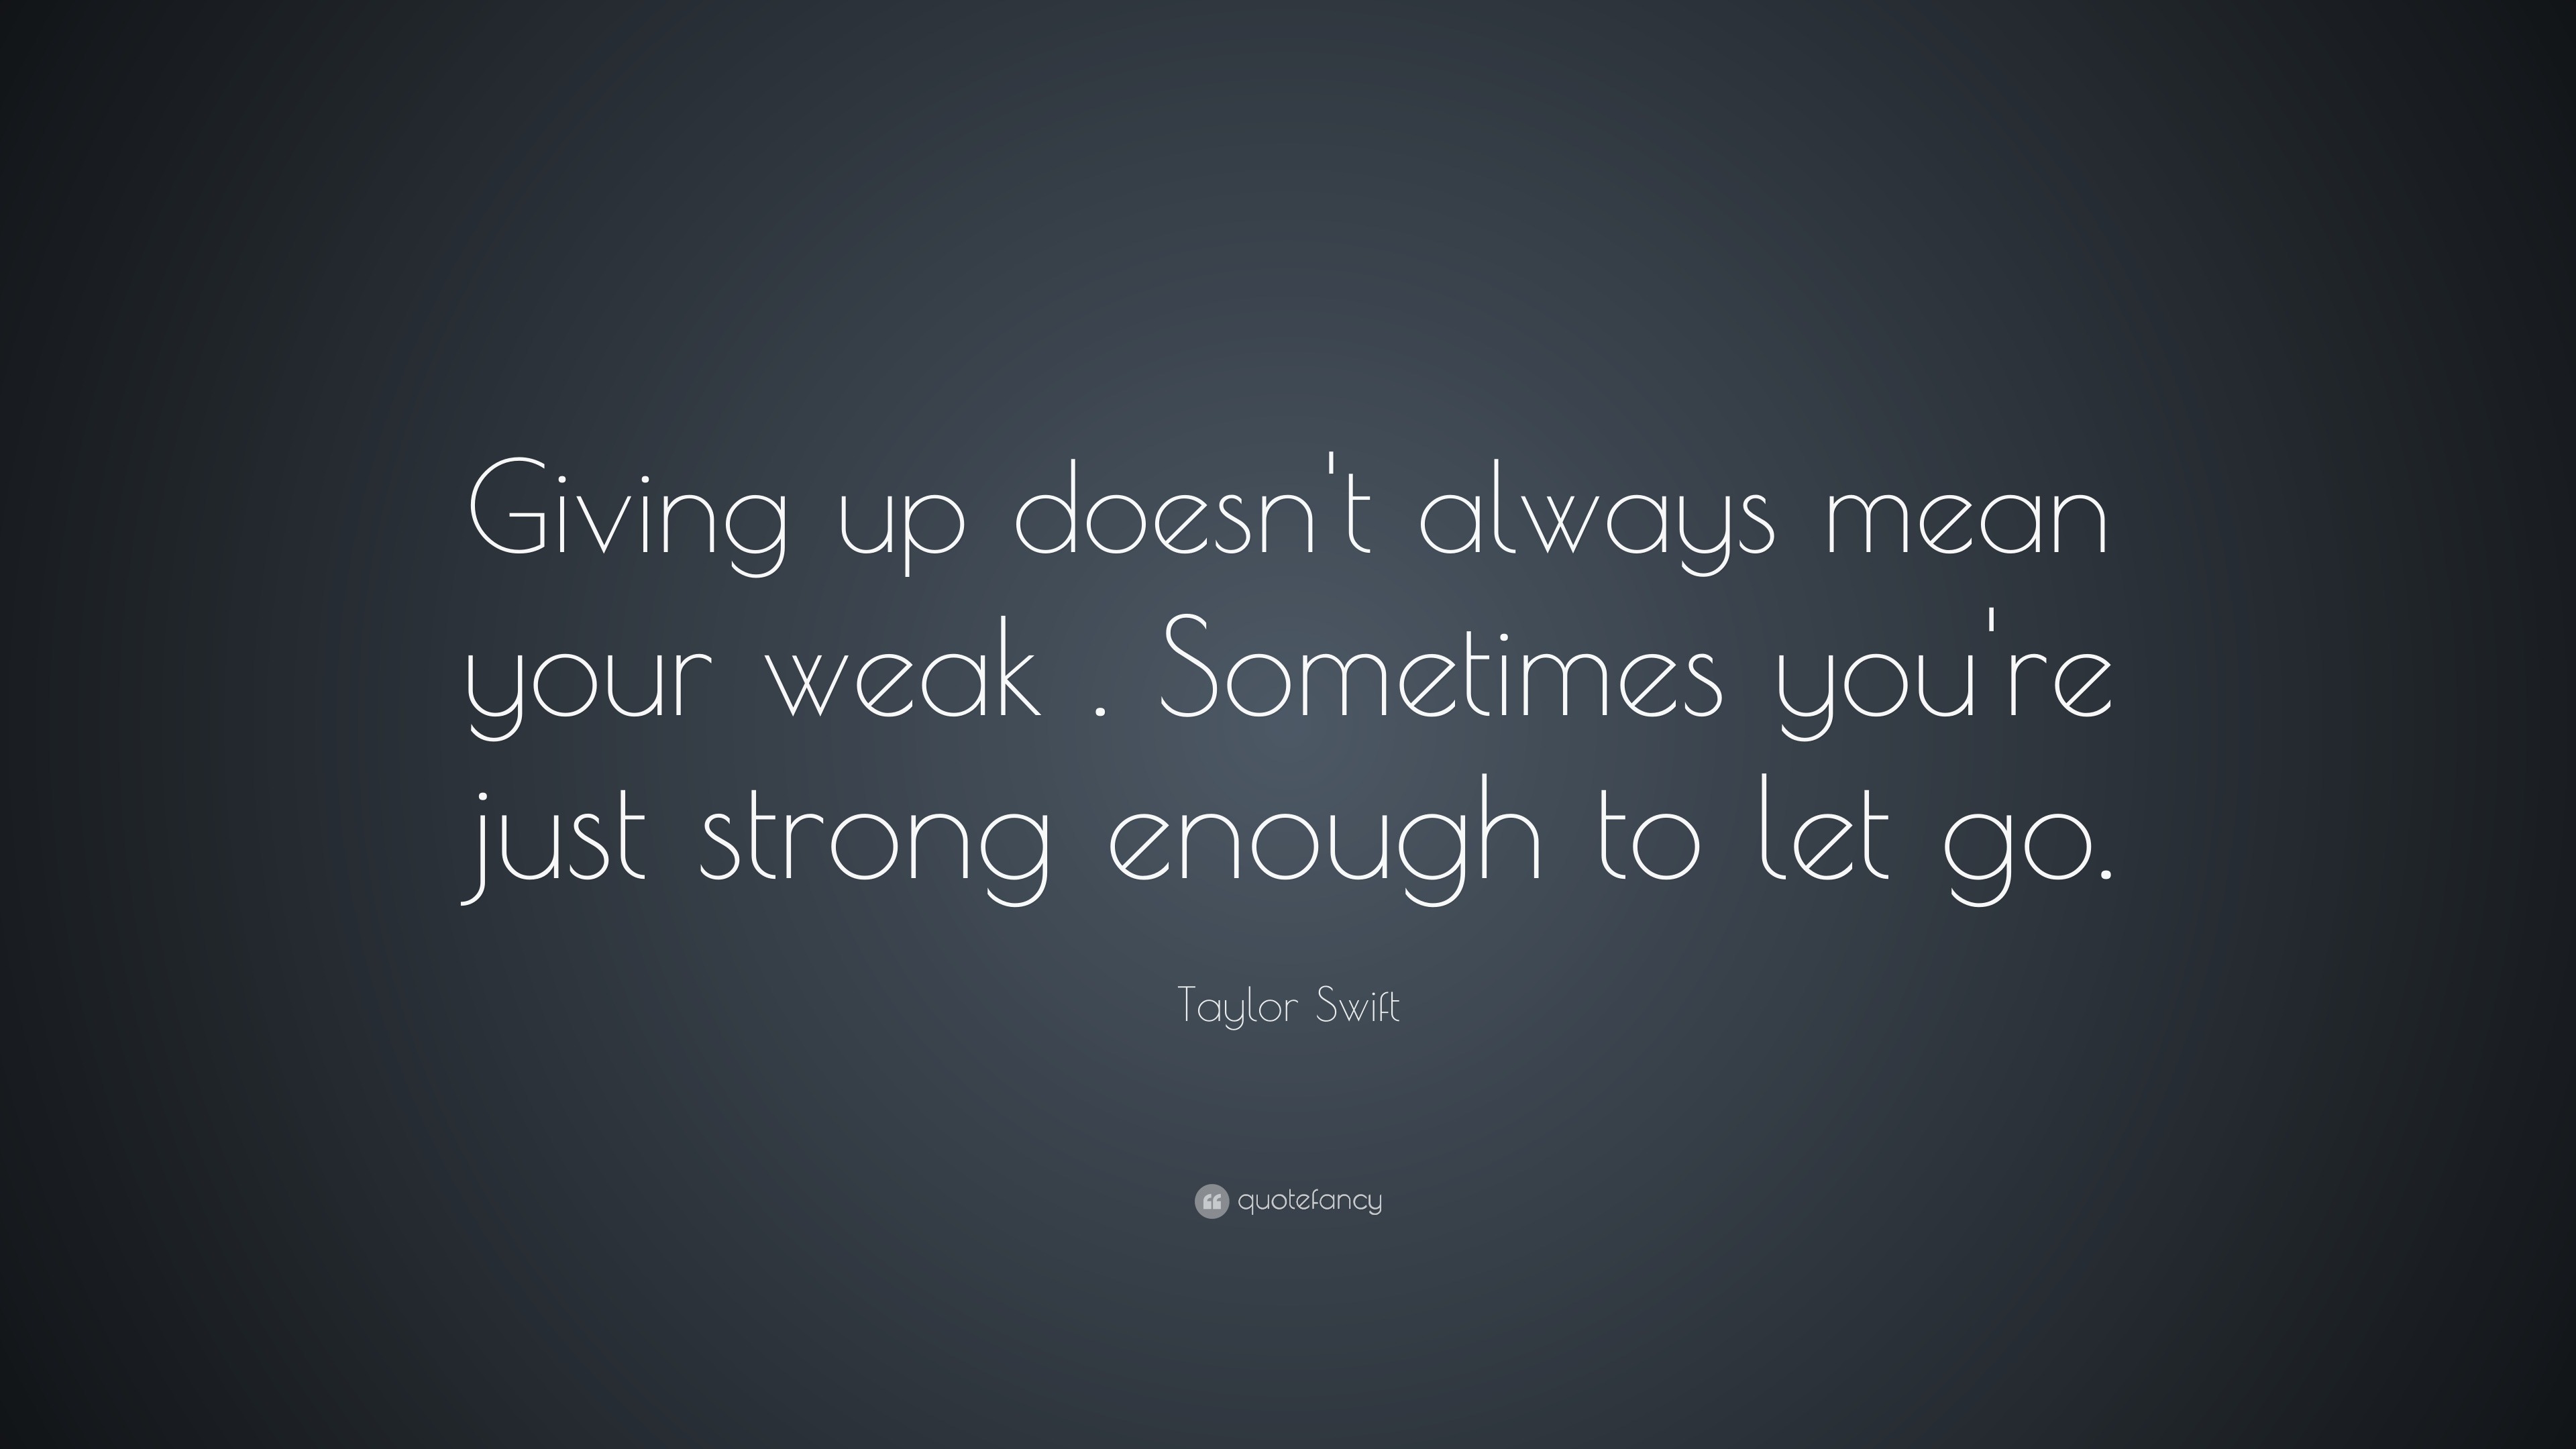 Taylor Swift Quote: “Giving up doesn't always mean your weak . Sometimes  you're just strong